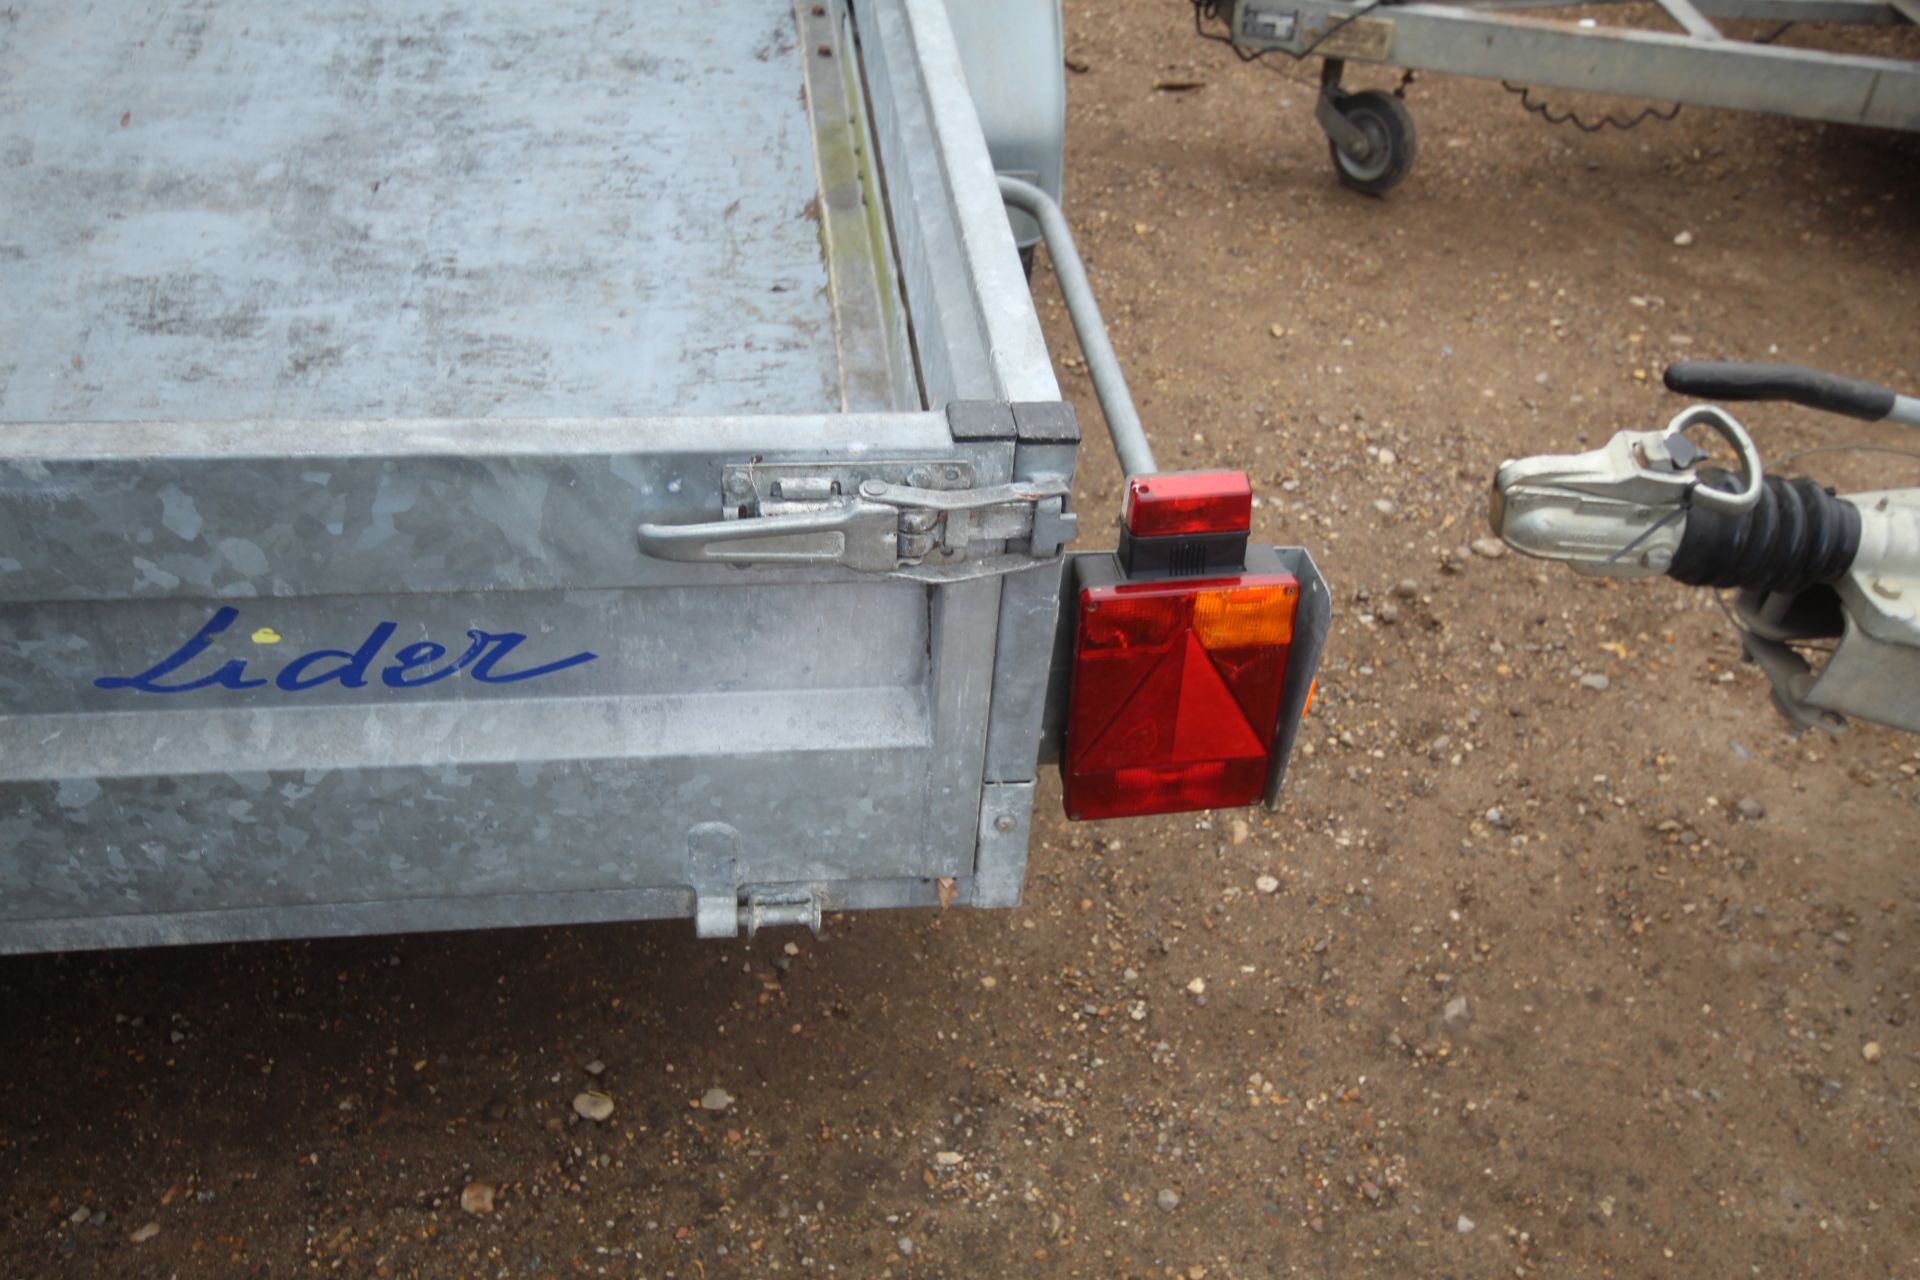 Lider 1T 10ft x 5ft 6in single axle tilt bed trailer. With brakes, bolt on sides, recent new tyres - Image 16 of 30